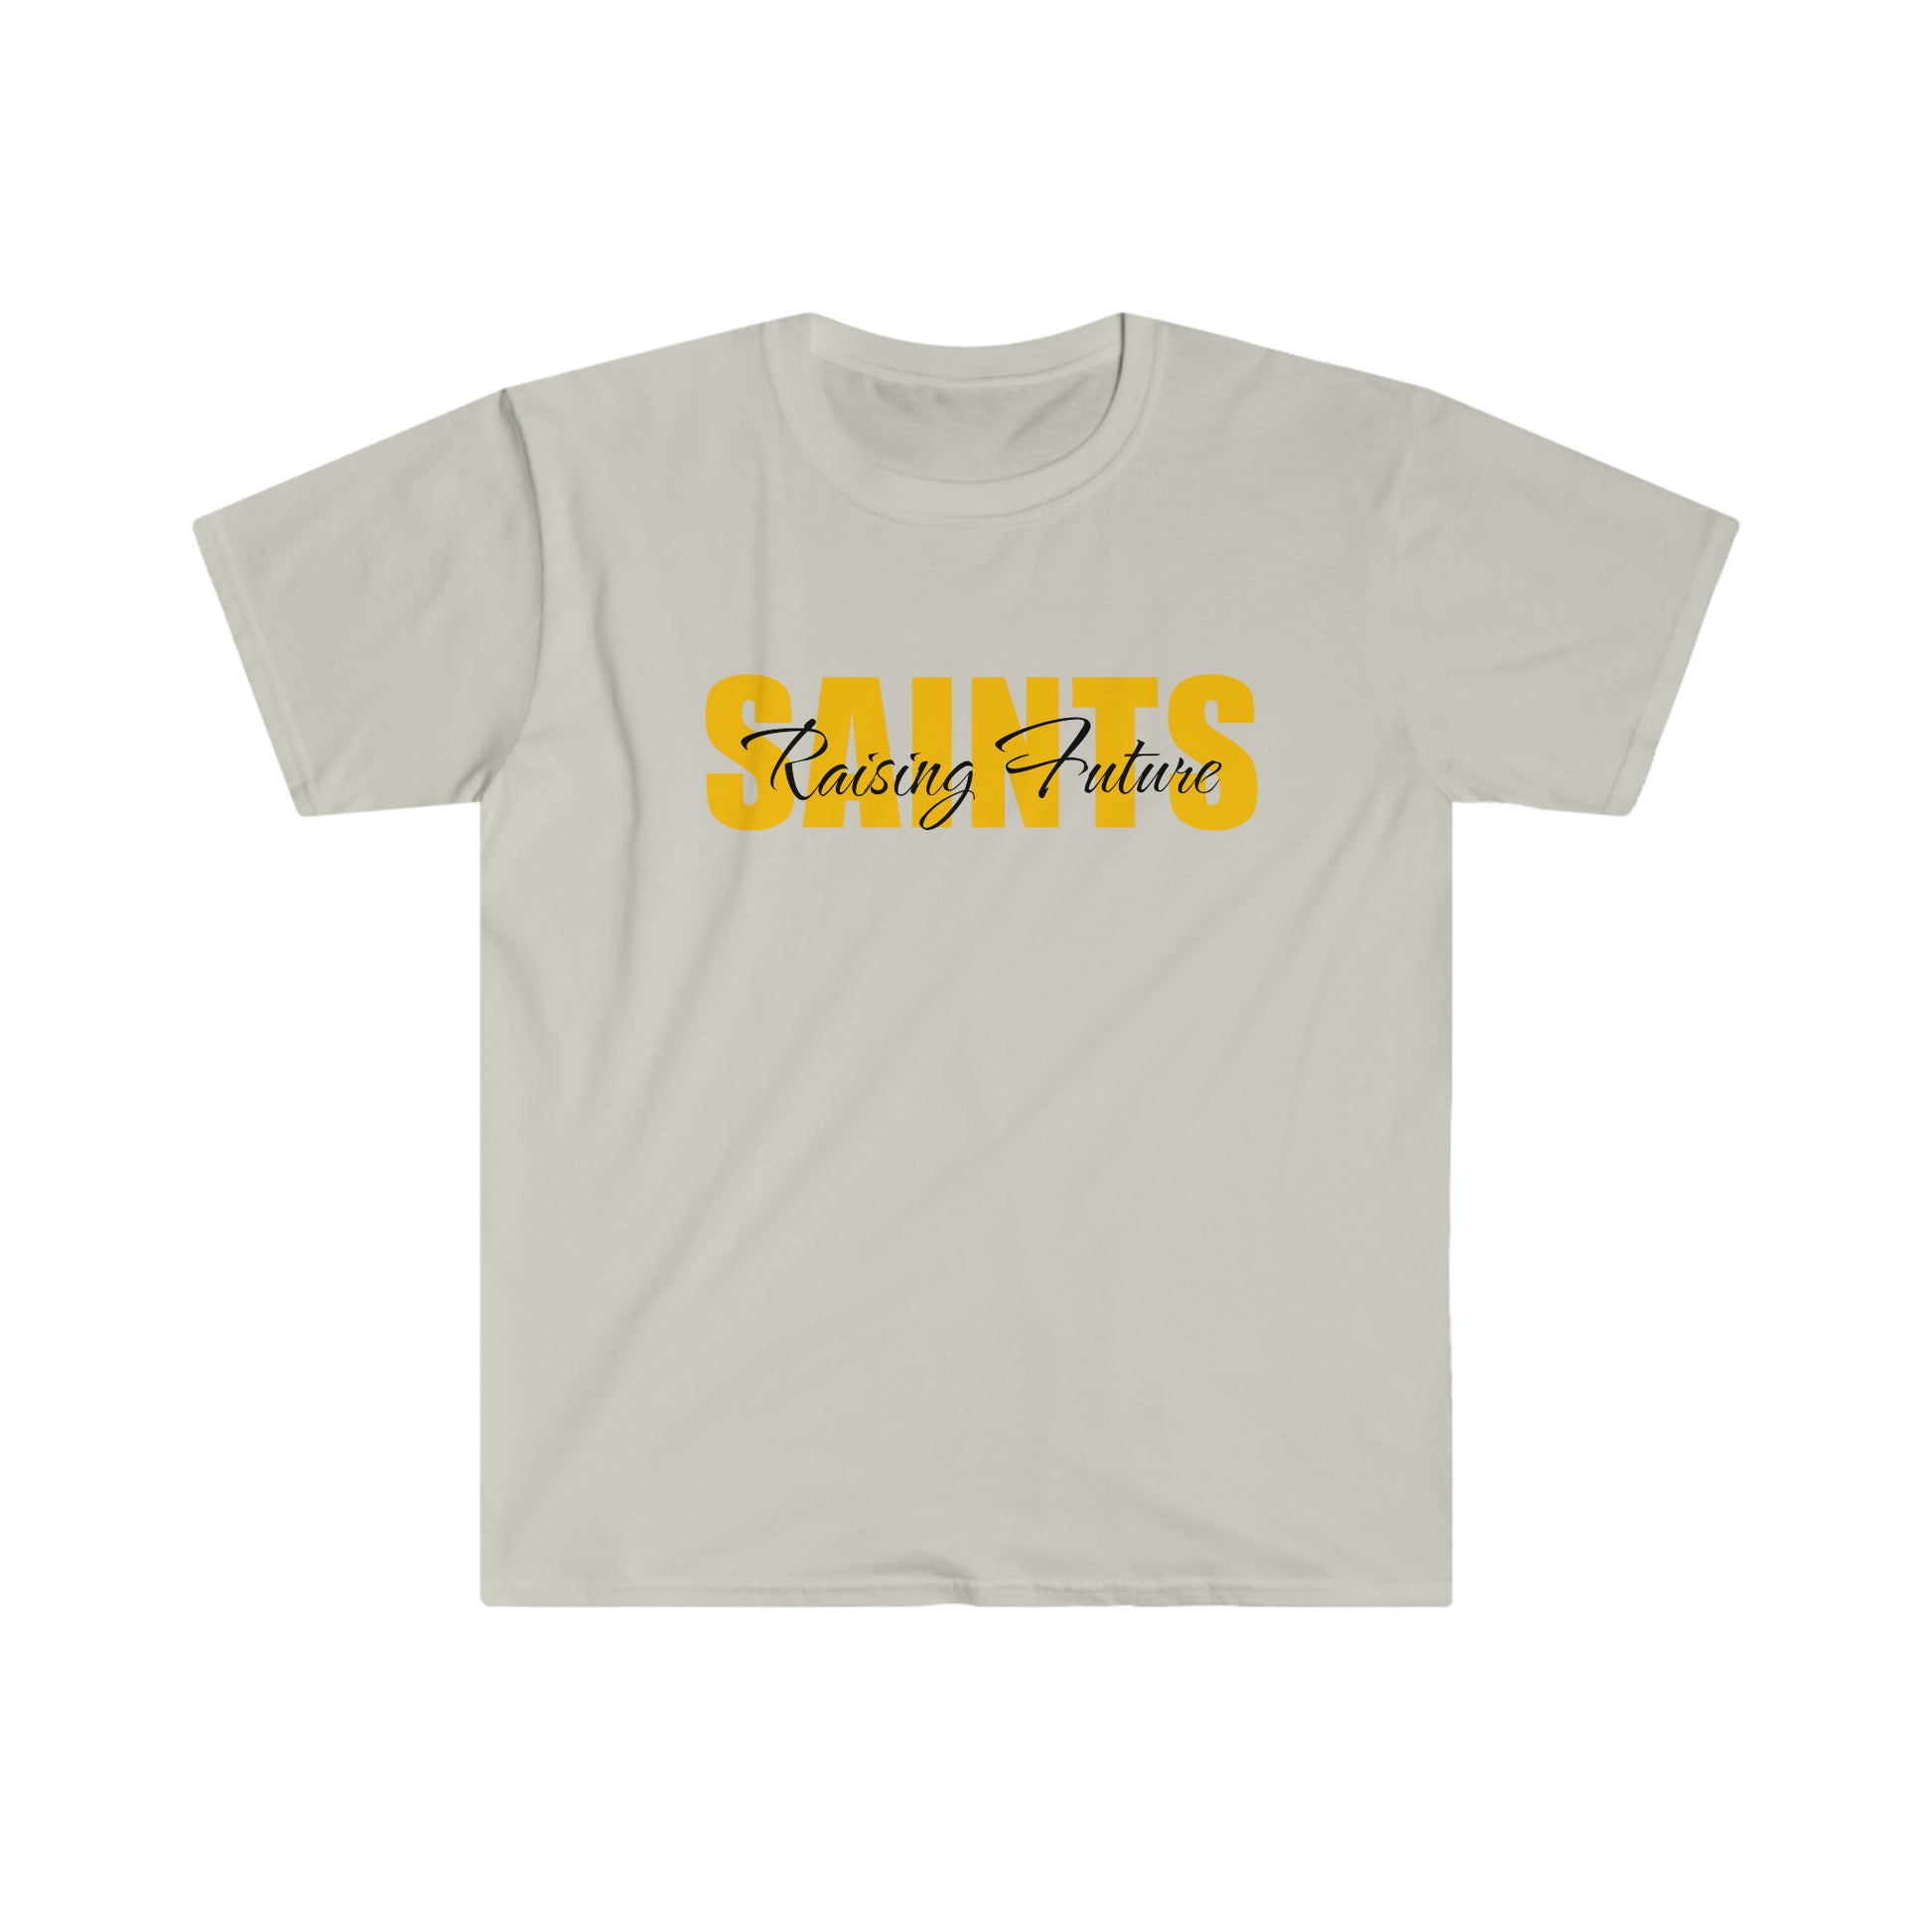 Tan T-Shirt with "Raising Future Saints" printed on it in yellow and black font.